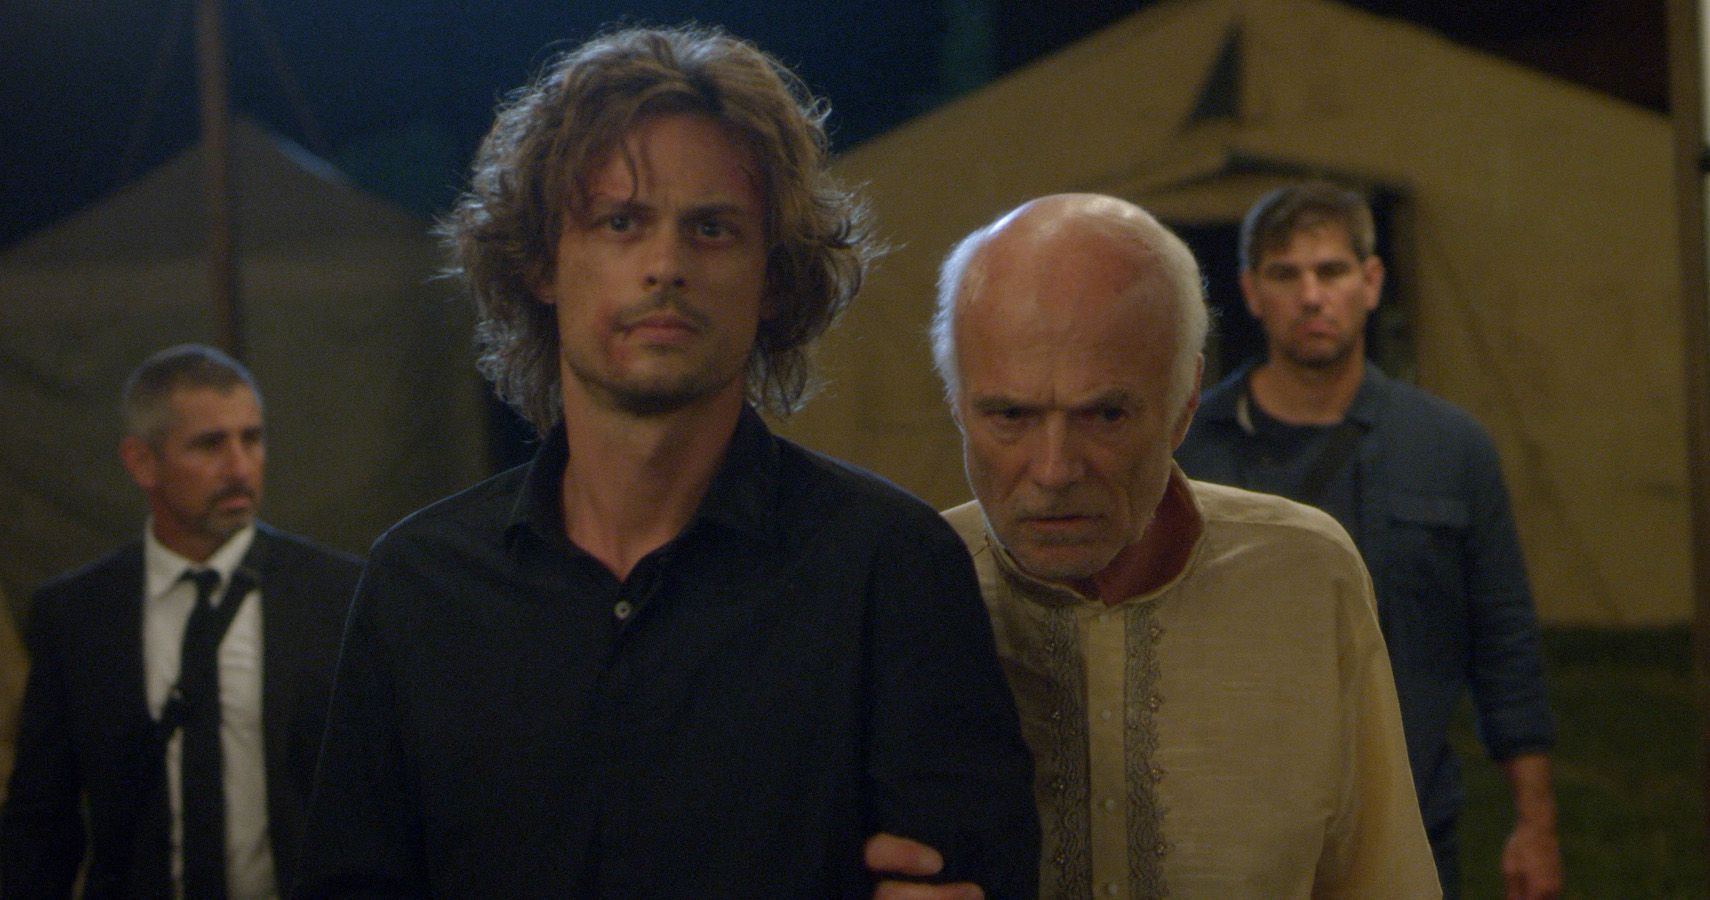 Criminal Minds: 10 Hidden Details About The Main Characters Everyone Missed